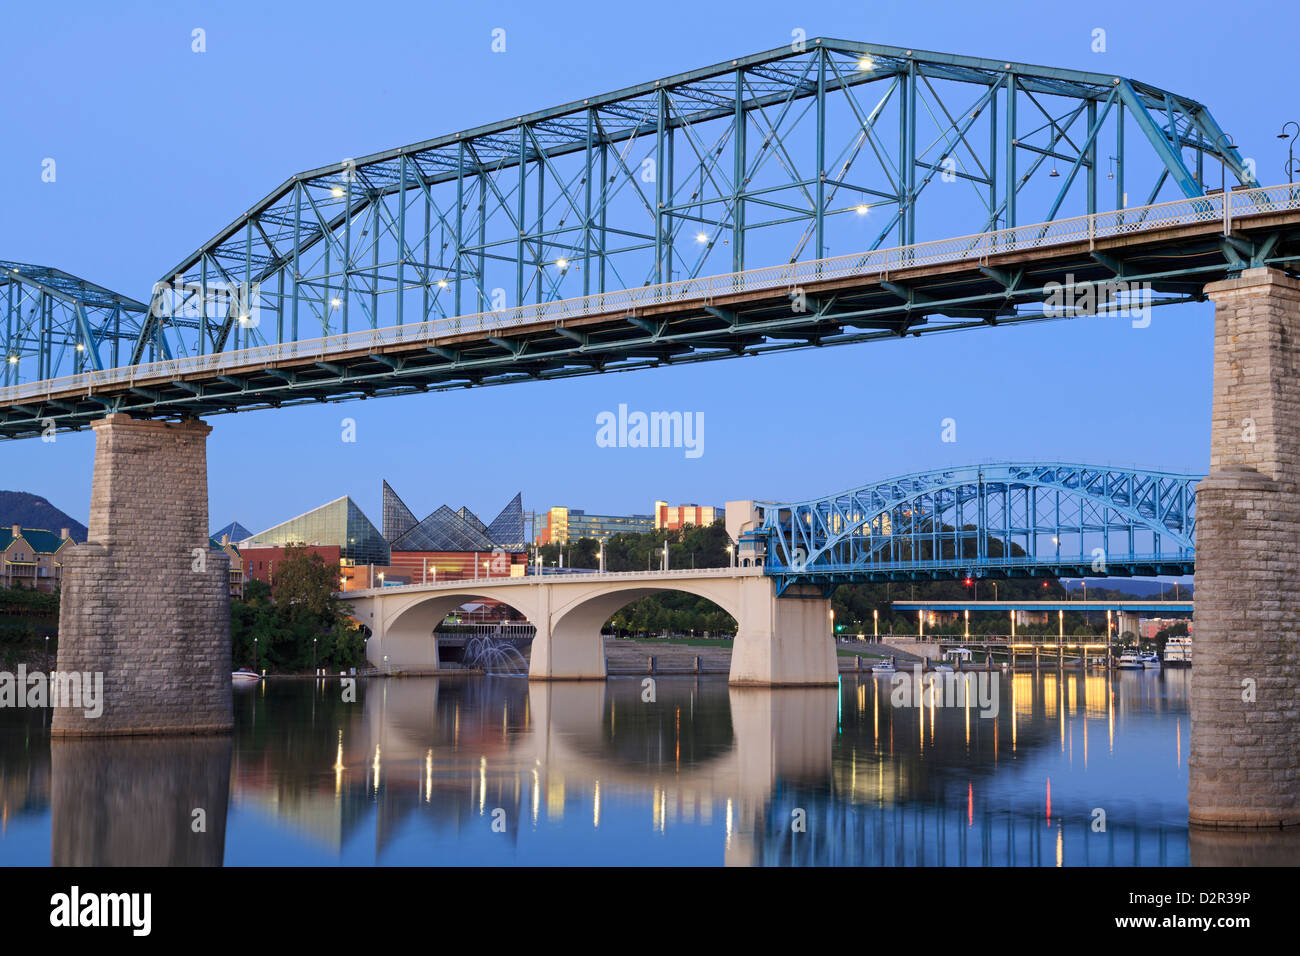 Walnut Street Bridge over the Tennessee River, Chattanooga, Tennessee, United States of America, North America Stock Photo